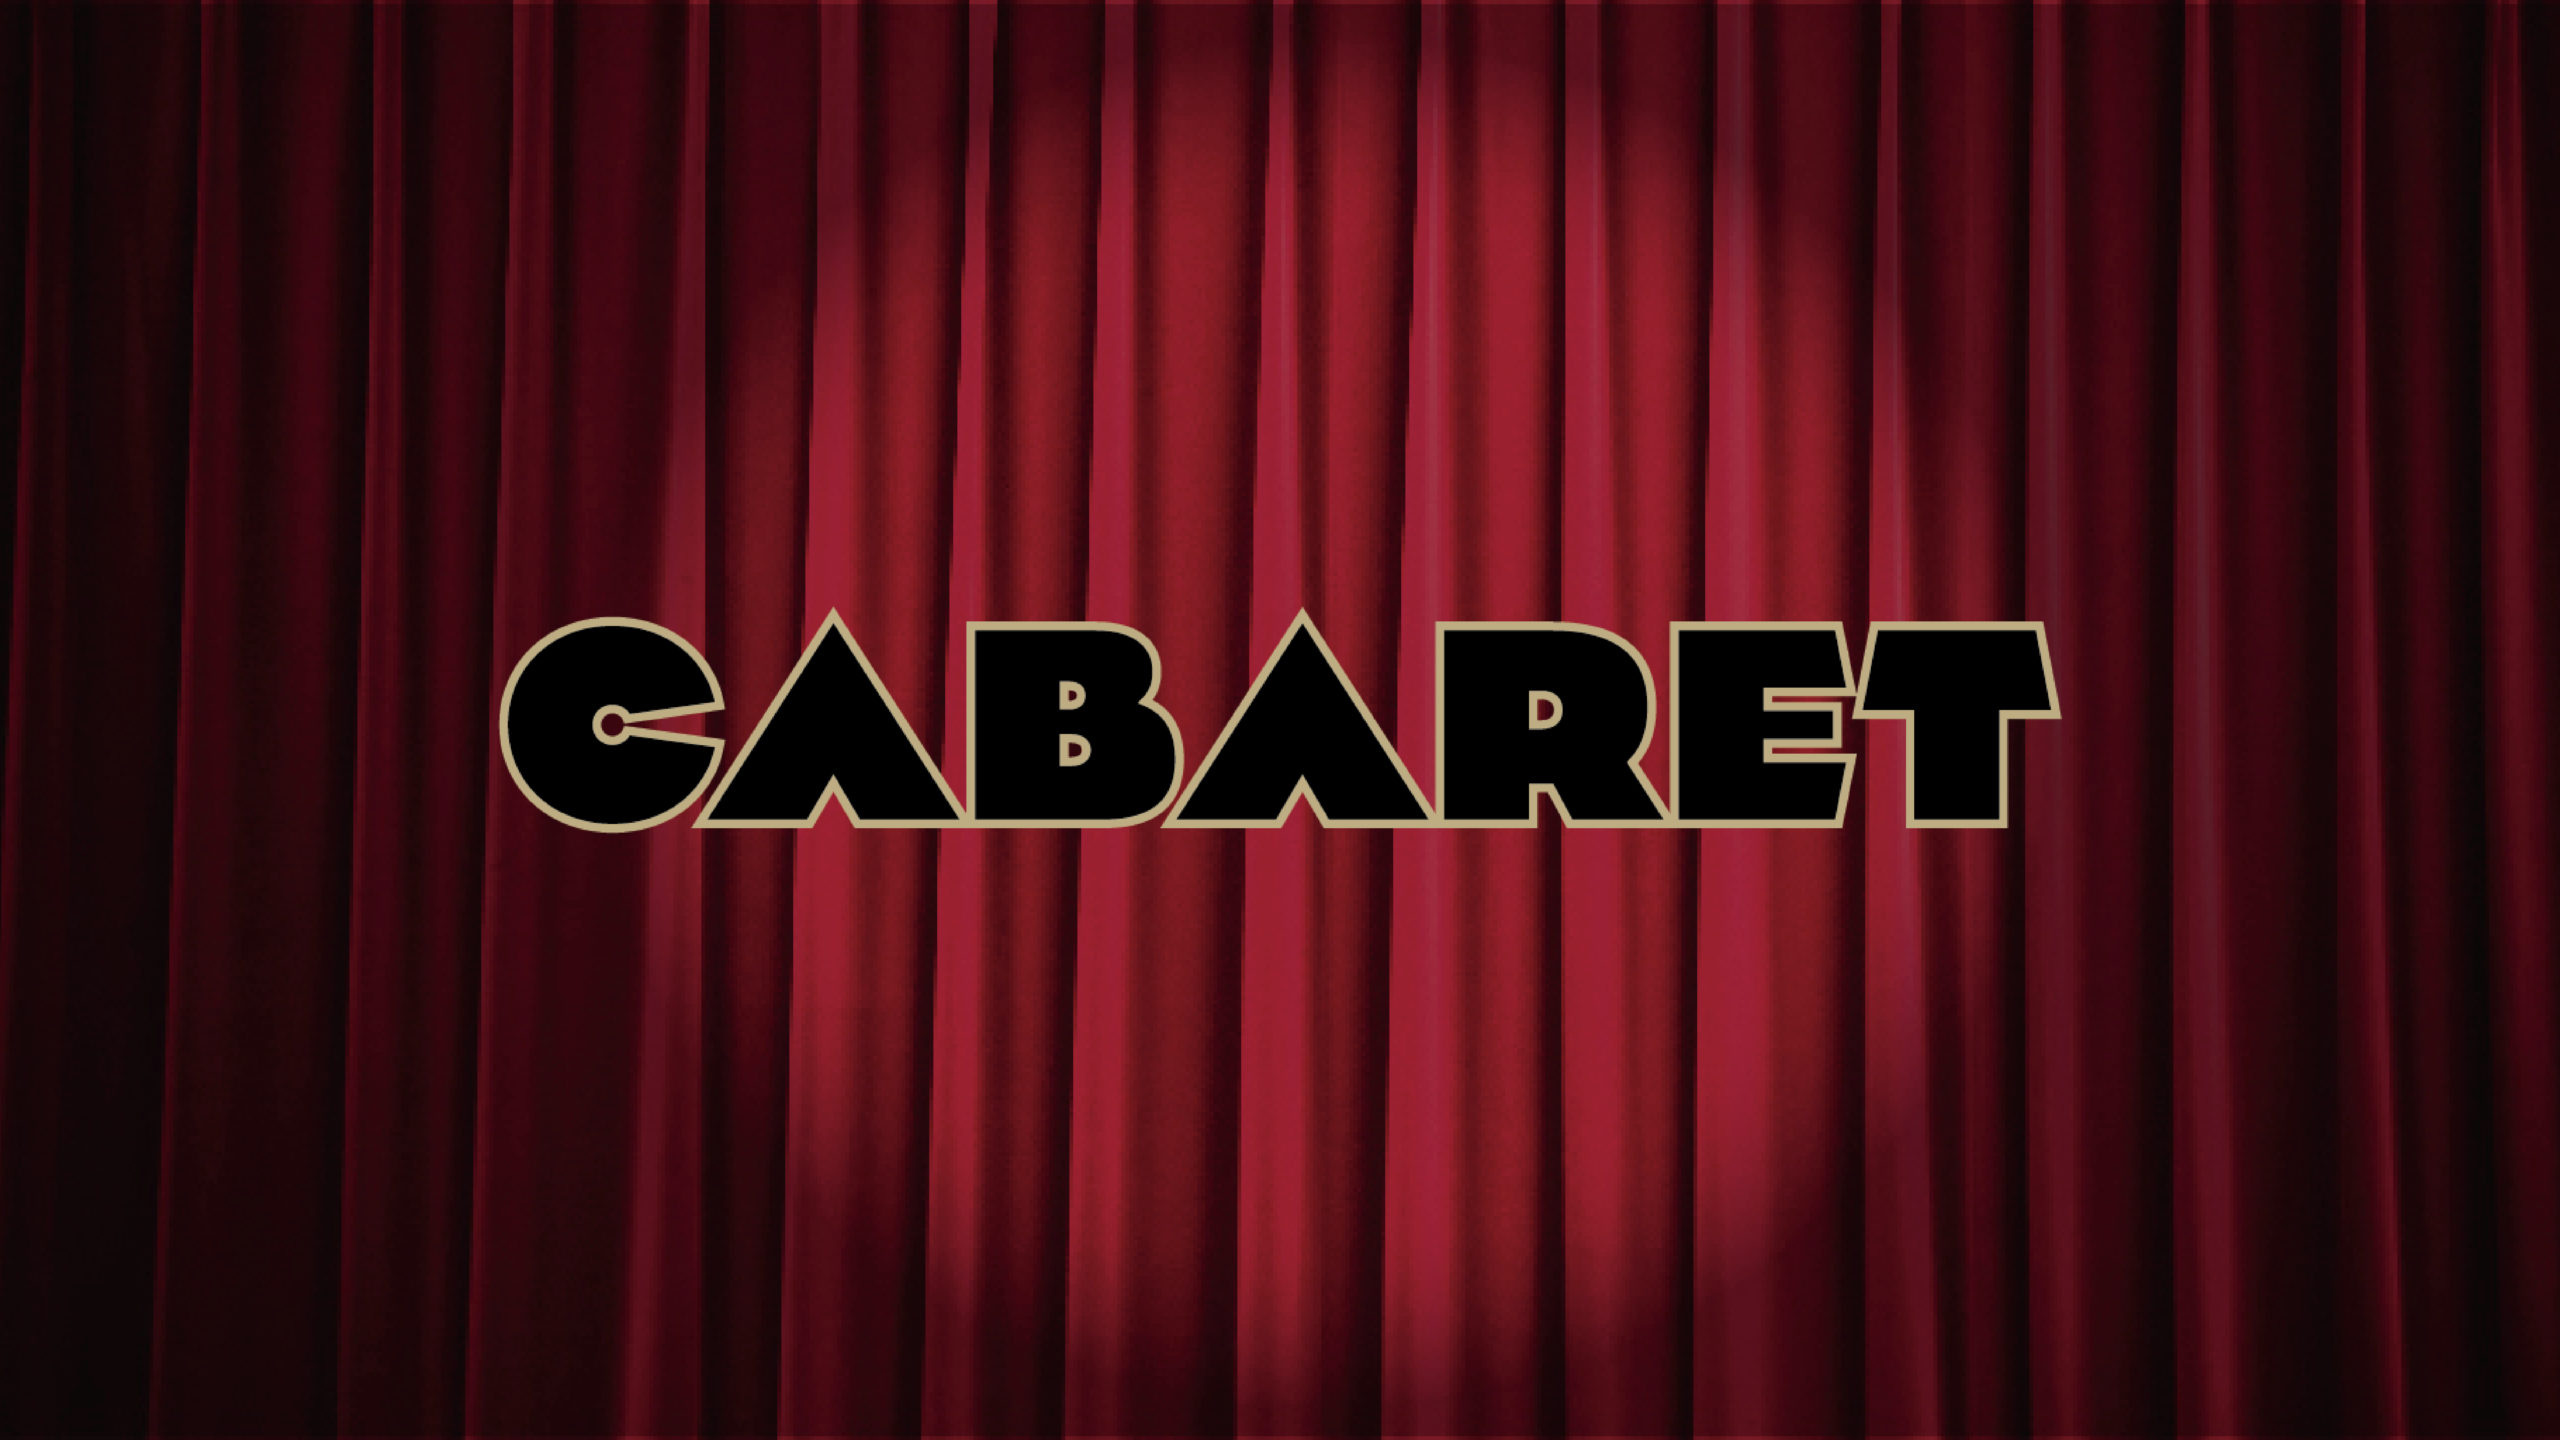 Cabaret: Dancing, singing, or comedy acts that are performed in the nightclubs. 2560x1440 HD Background.